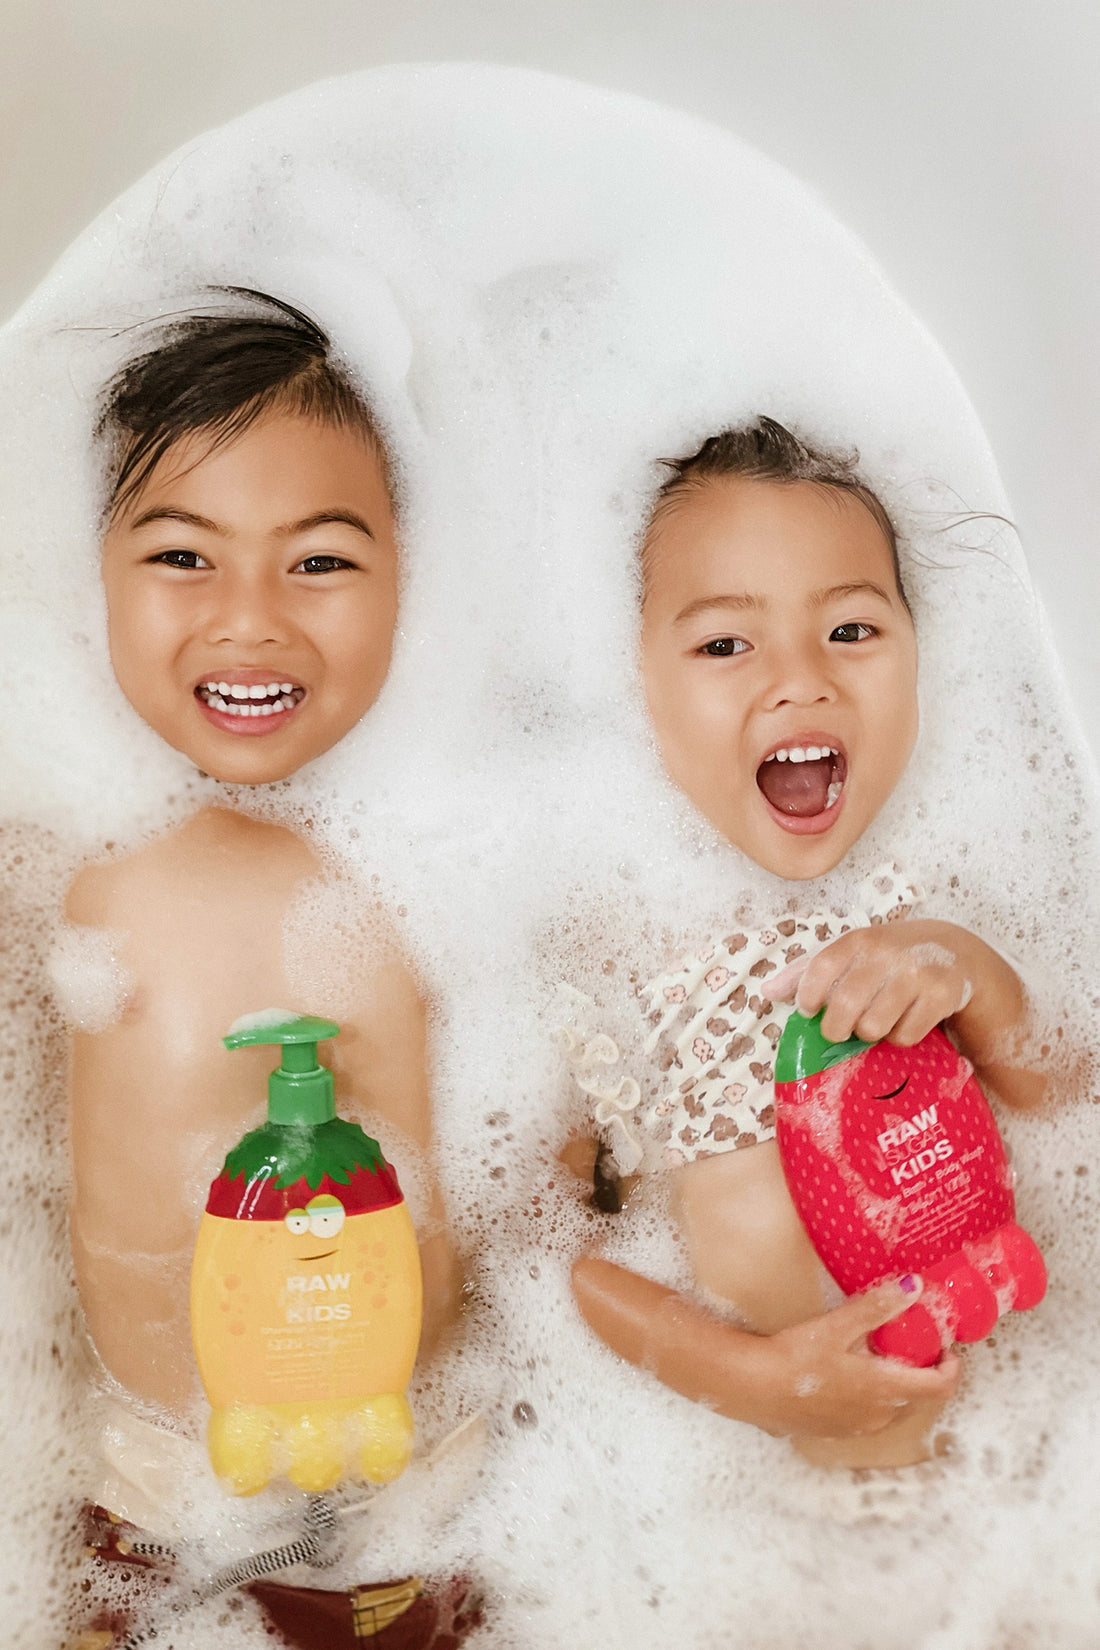 Two Kids holding Raw Sugar kids products surrounded by bubbles